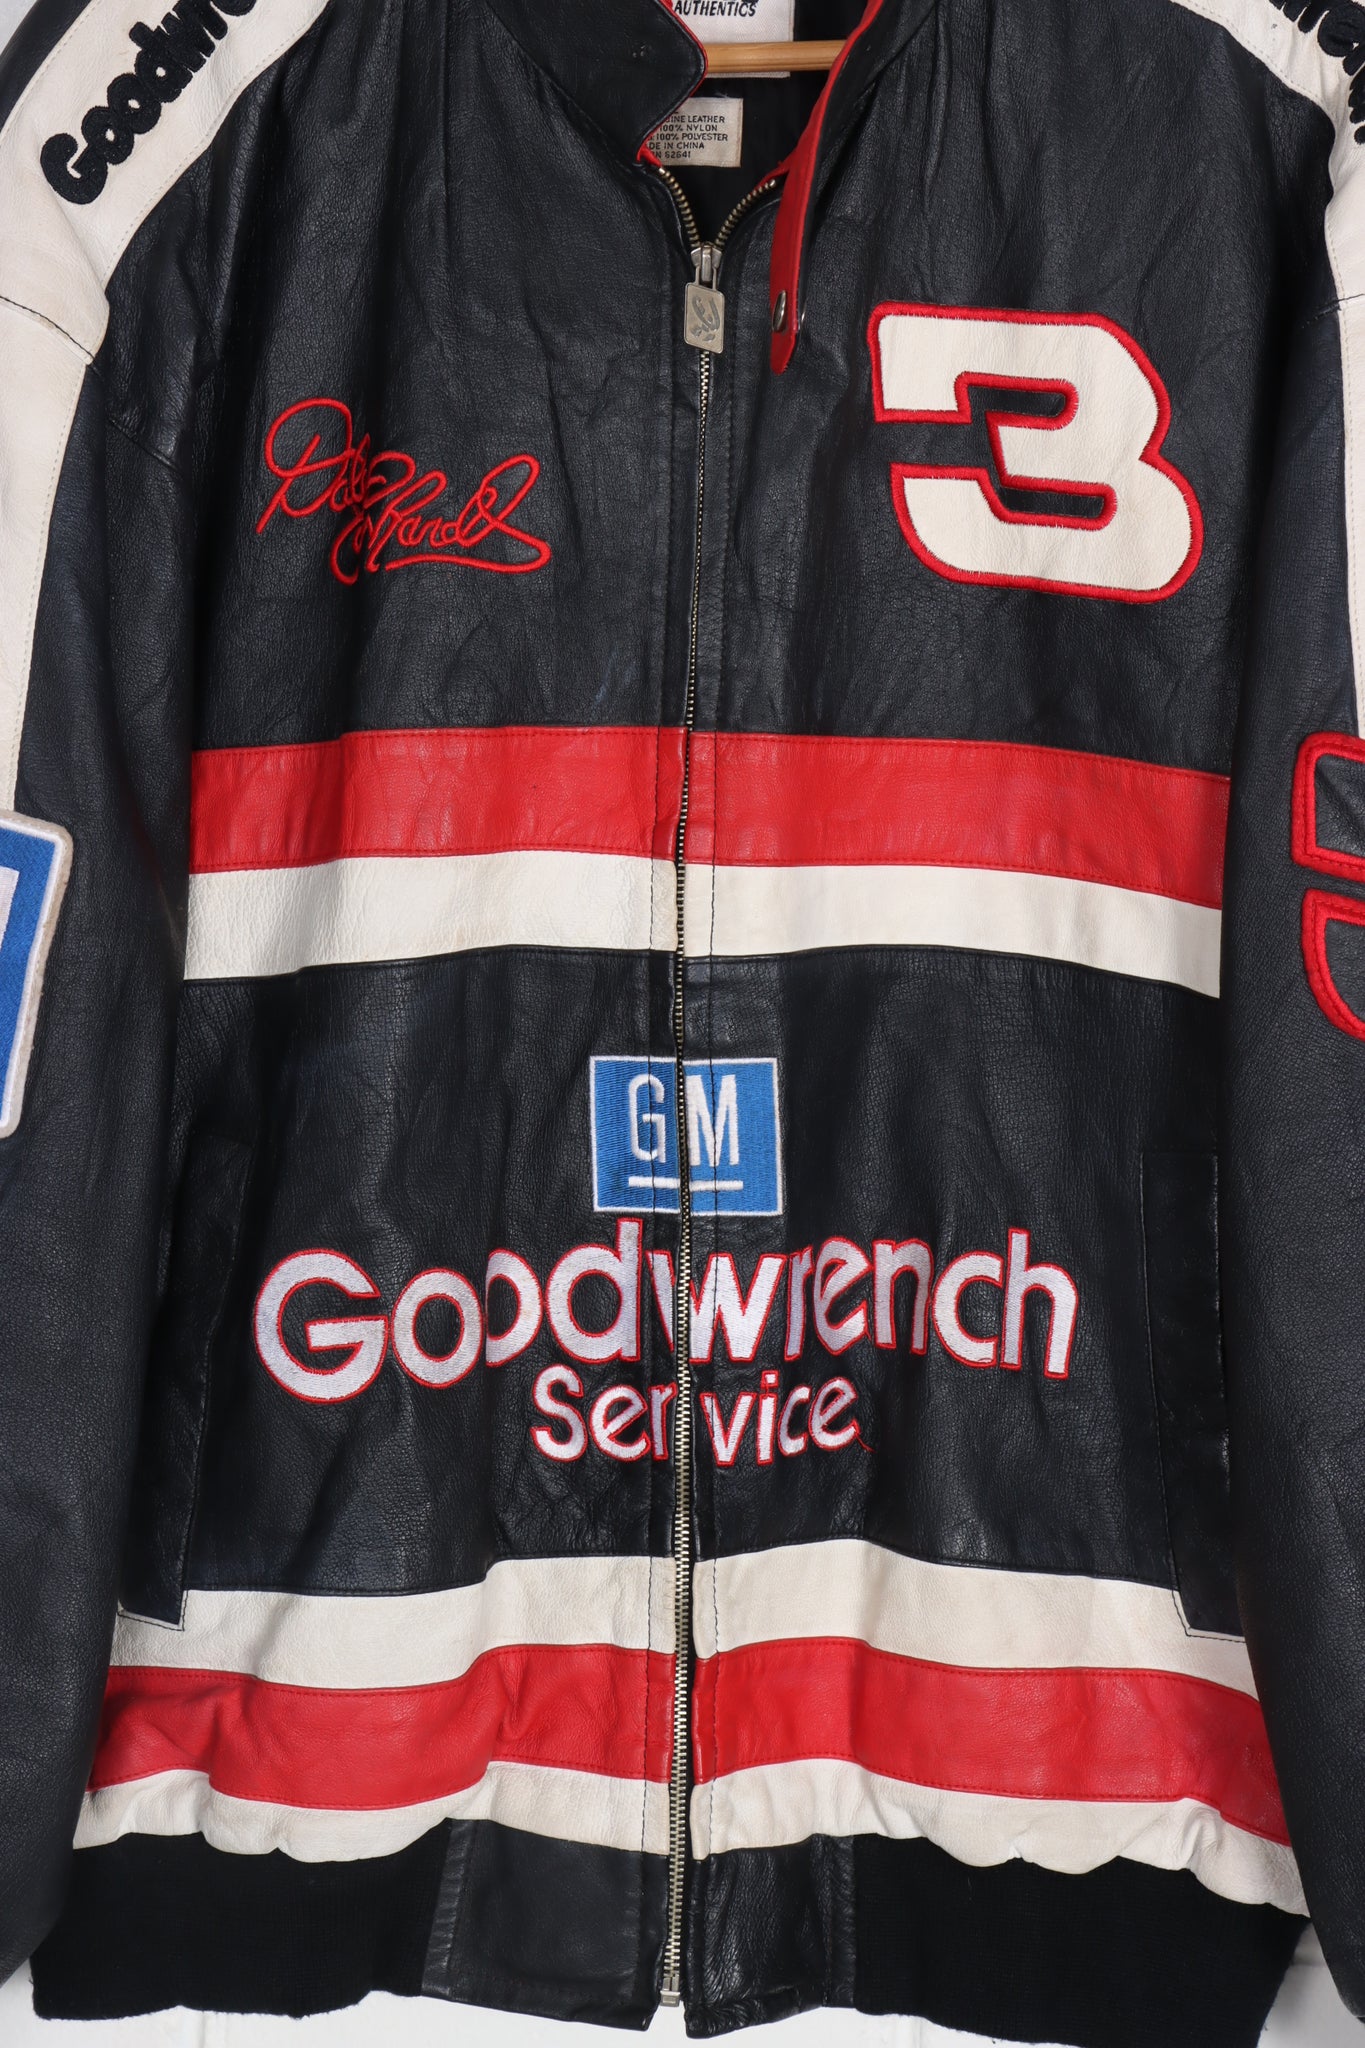 NASCAR Dale Earnhardt #3 Goodwrench Service Leather Racing Jacket